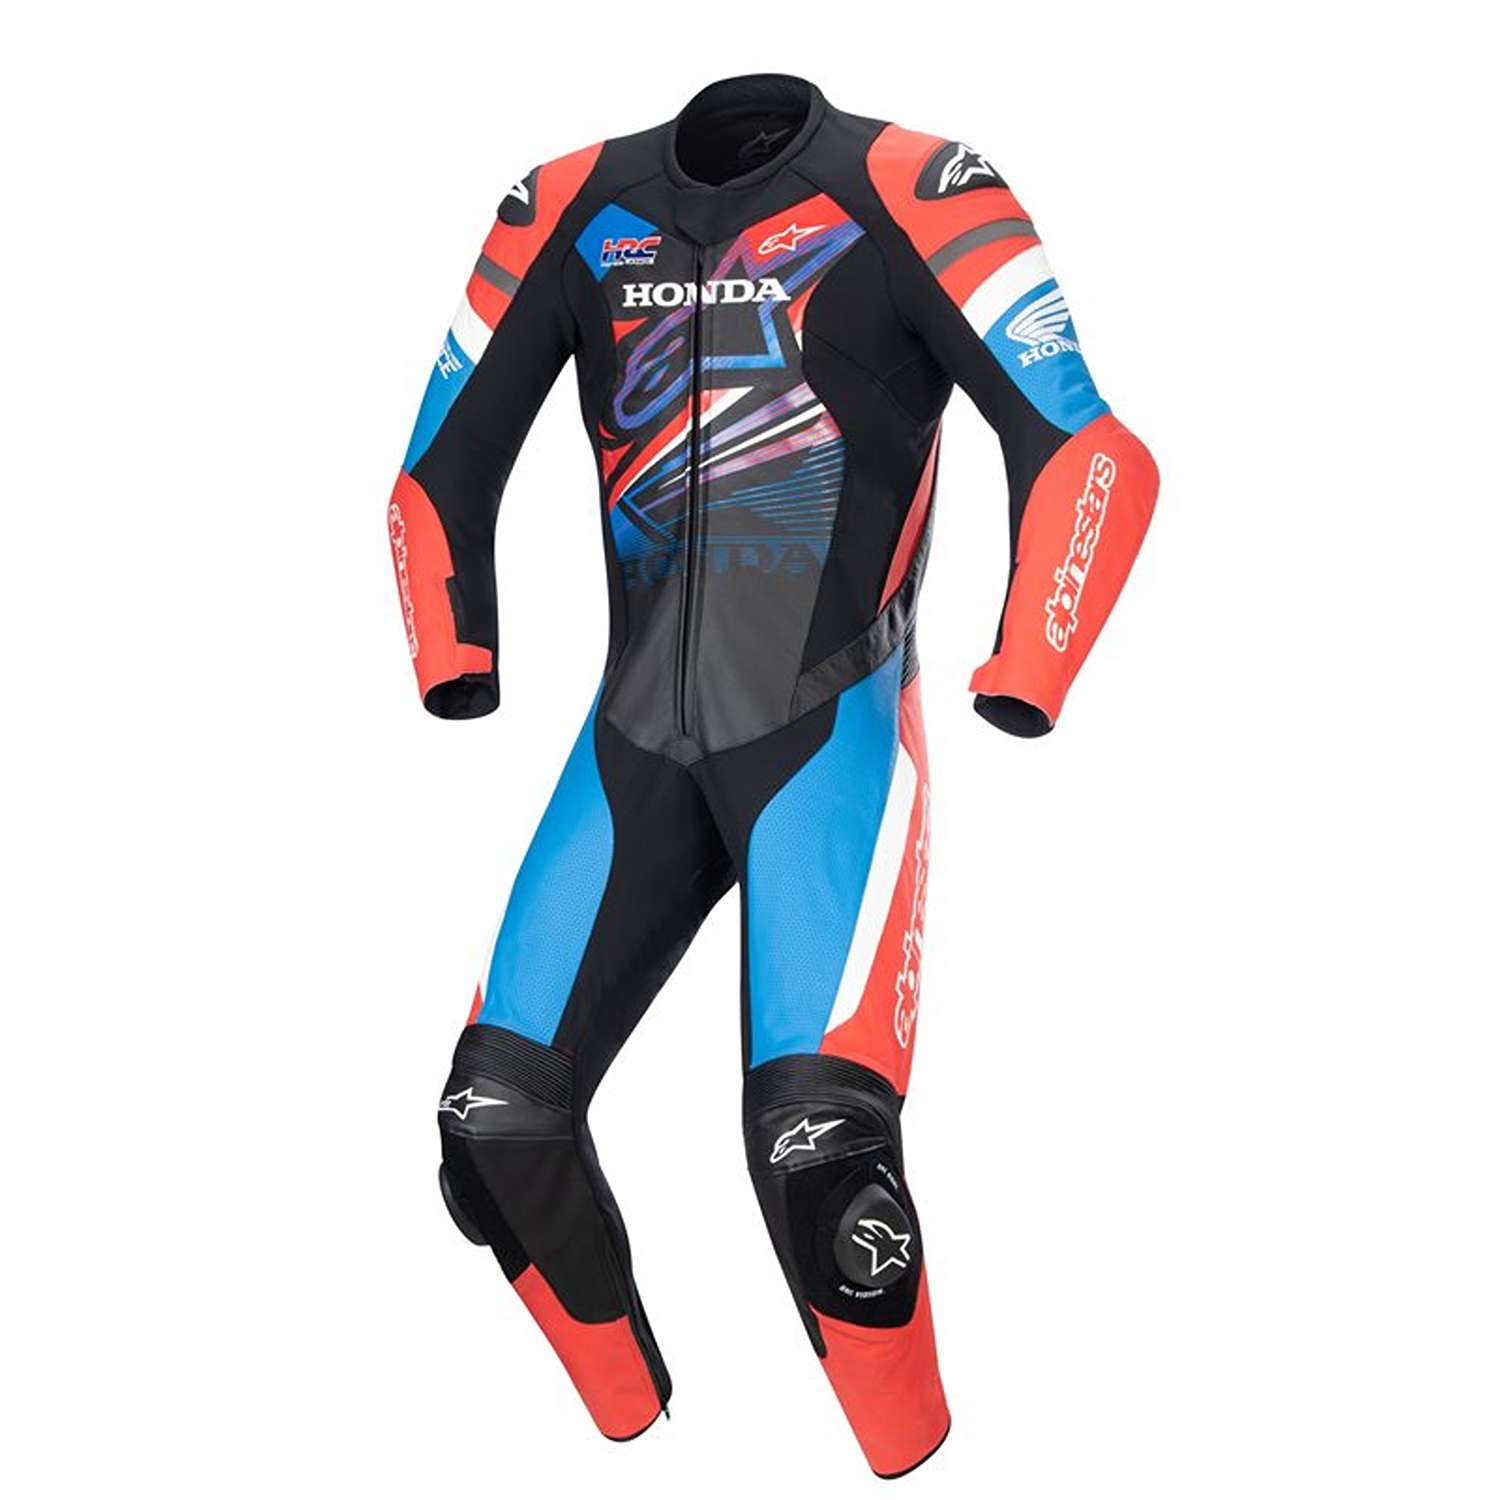 Image of Alpinestars Honda Gp Force Leather Suit Black Bright Red Blue Taille 48